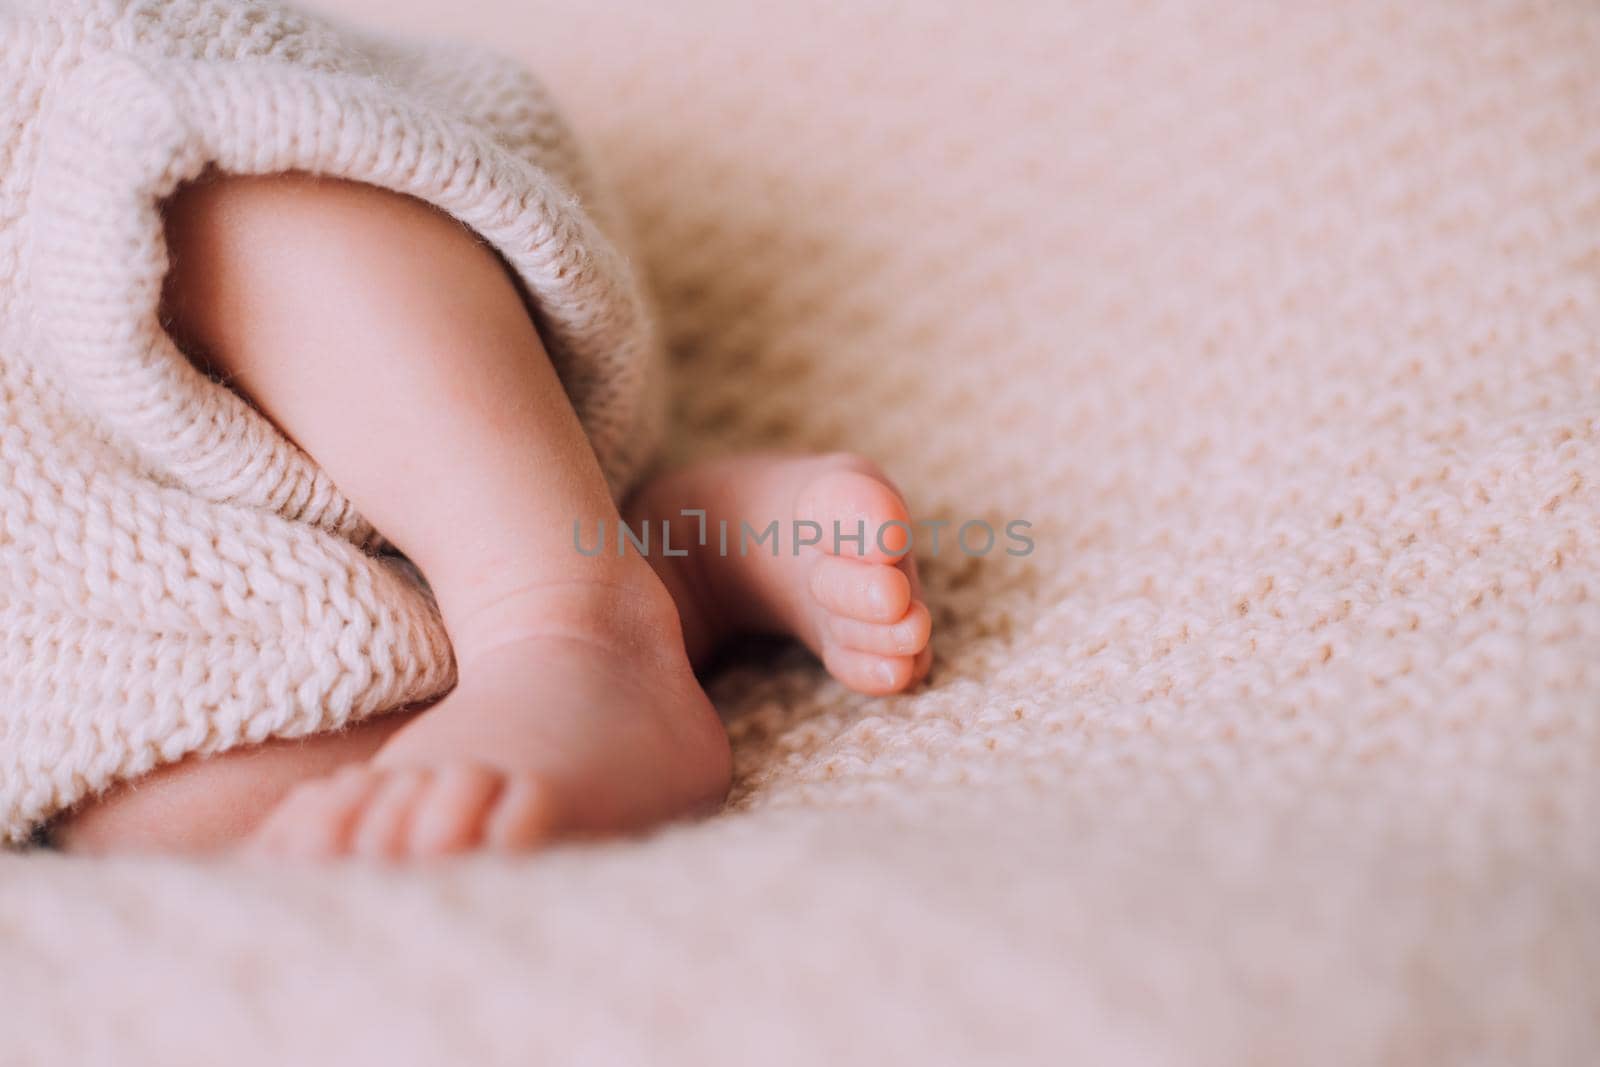 Legs of a newborn baby lifestyle . A small child. An article about newborns. by alenka2194